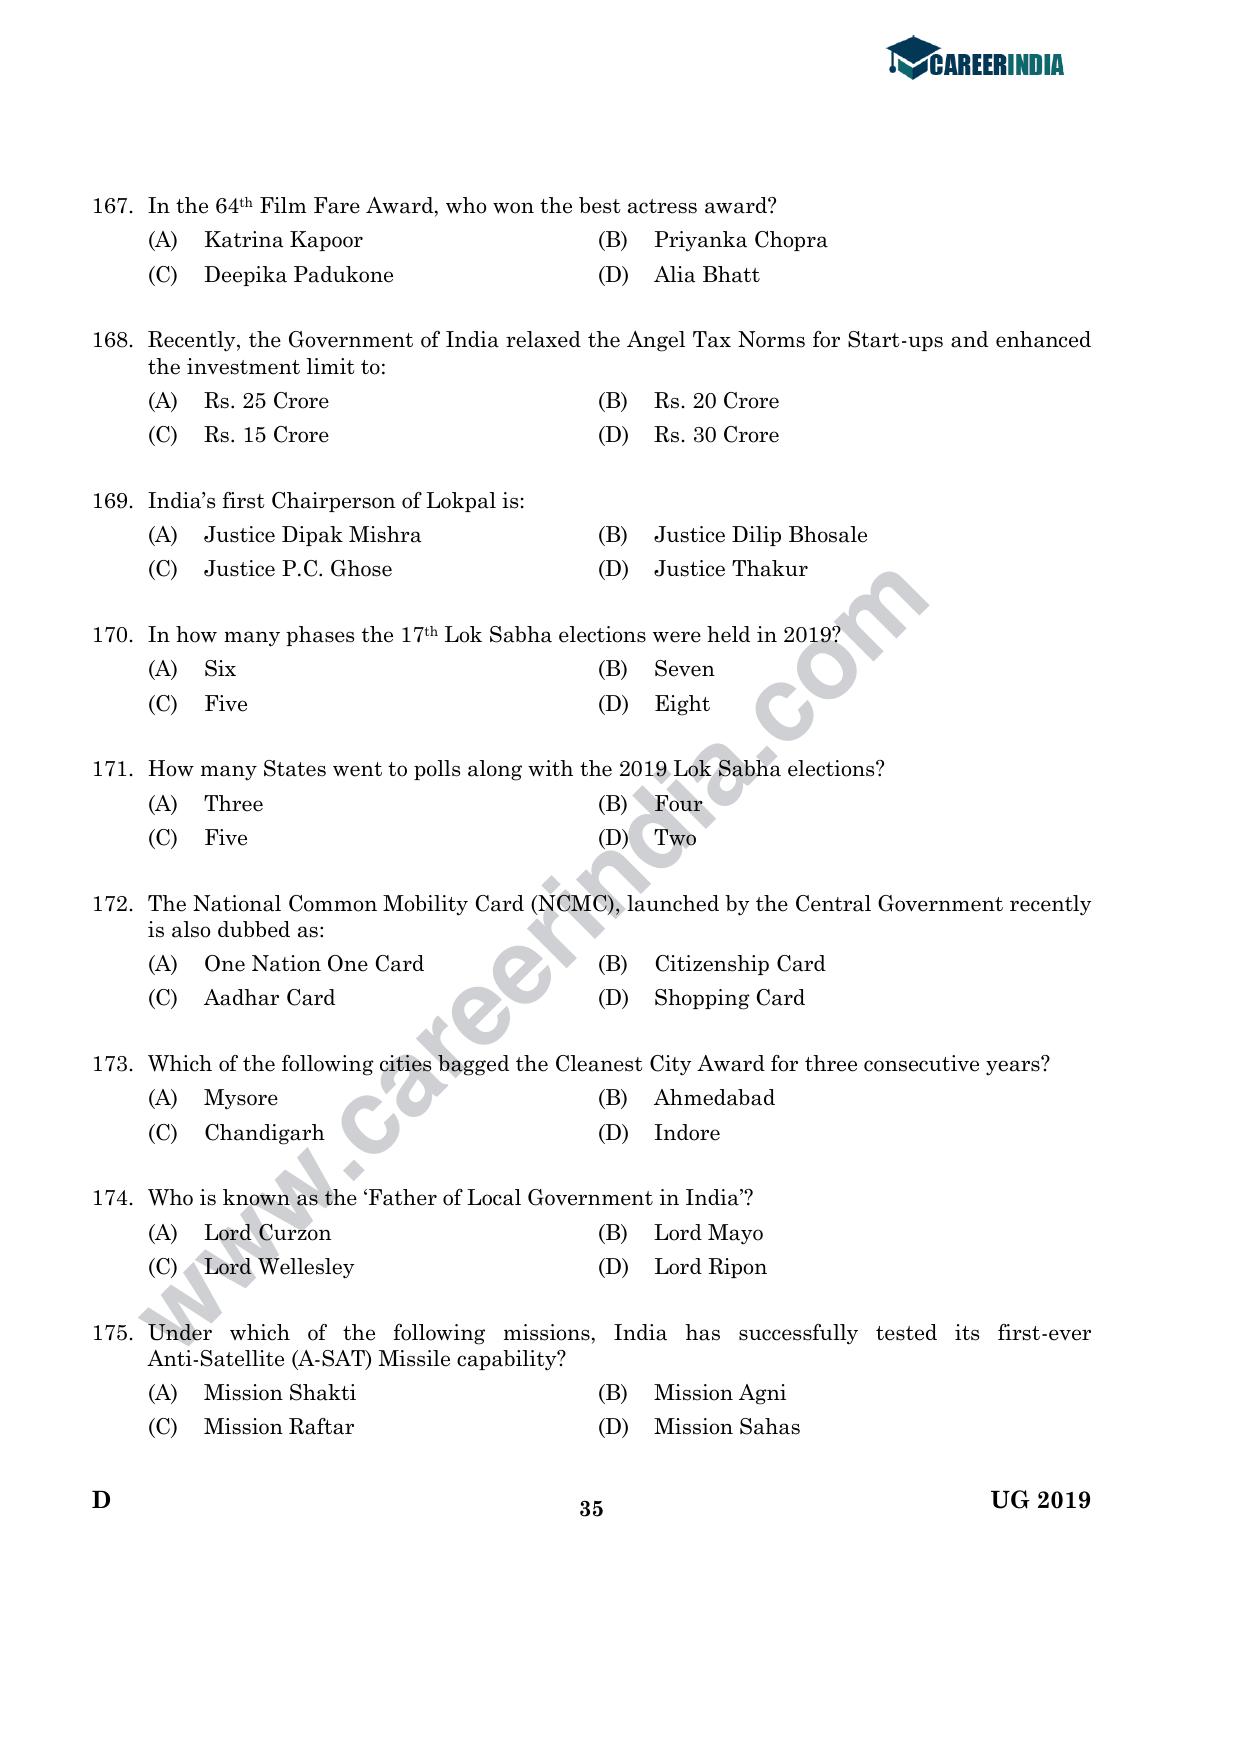 CLAT 2019 UG Logical-Reasoning Question Paper - Page 34